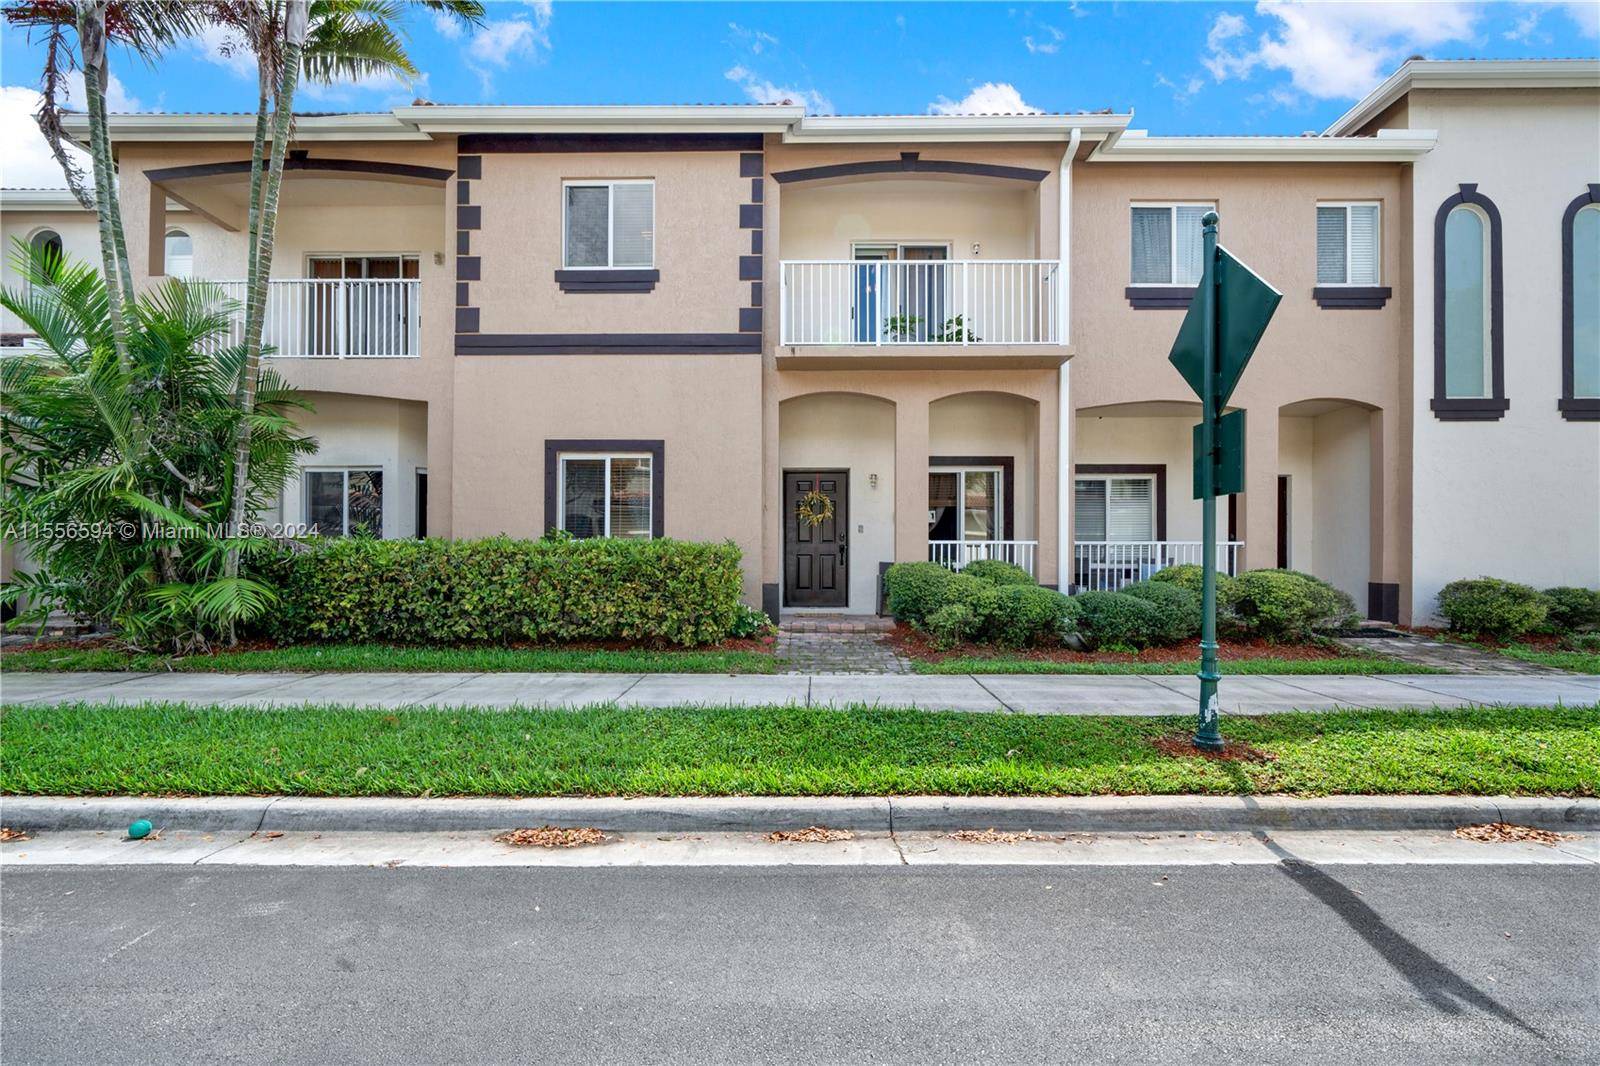 5K towards Closing cost Welcome to Arbor Park Townhouse a meticulously maintained 4 bedroom, 3 bathroom residence offering modern comforts and community charm.